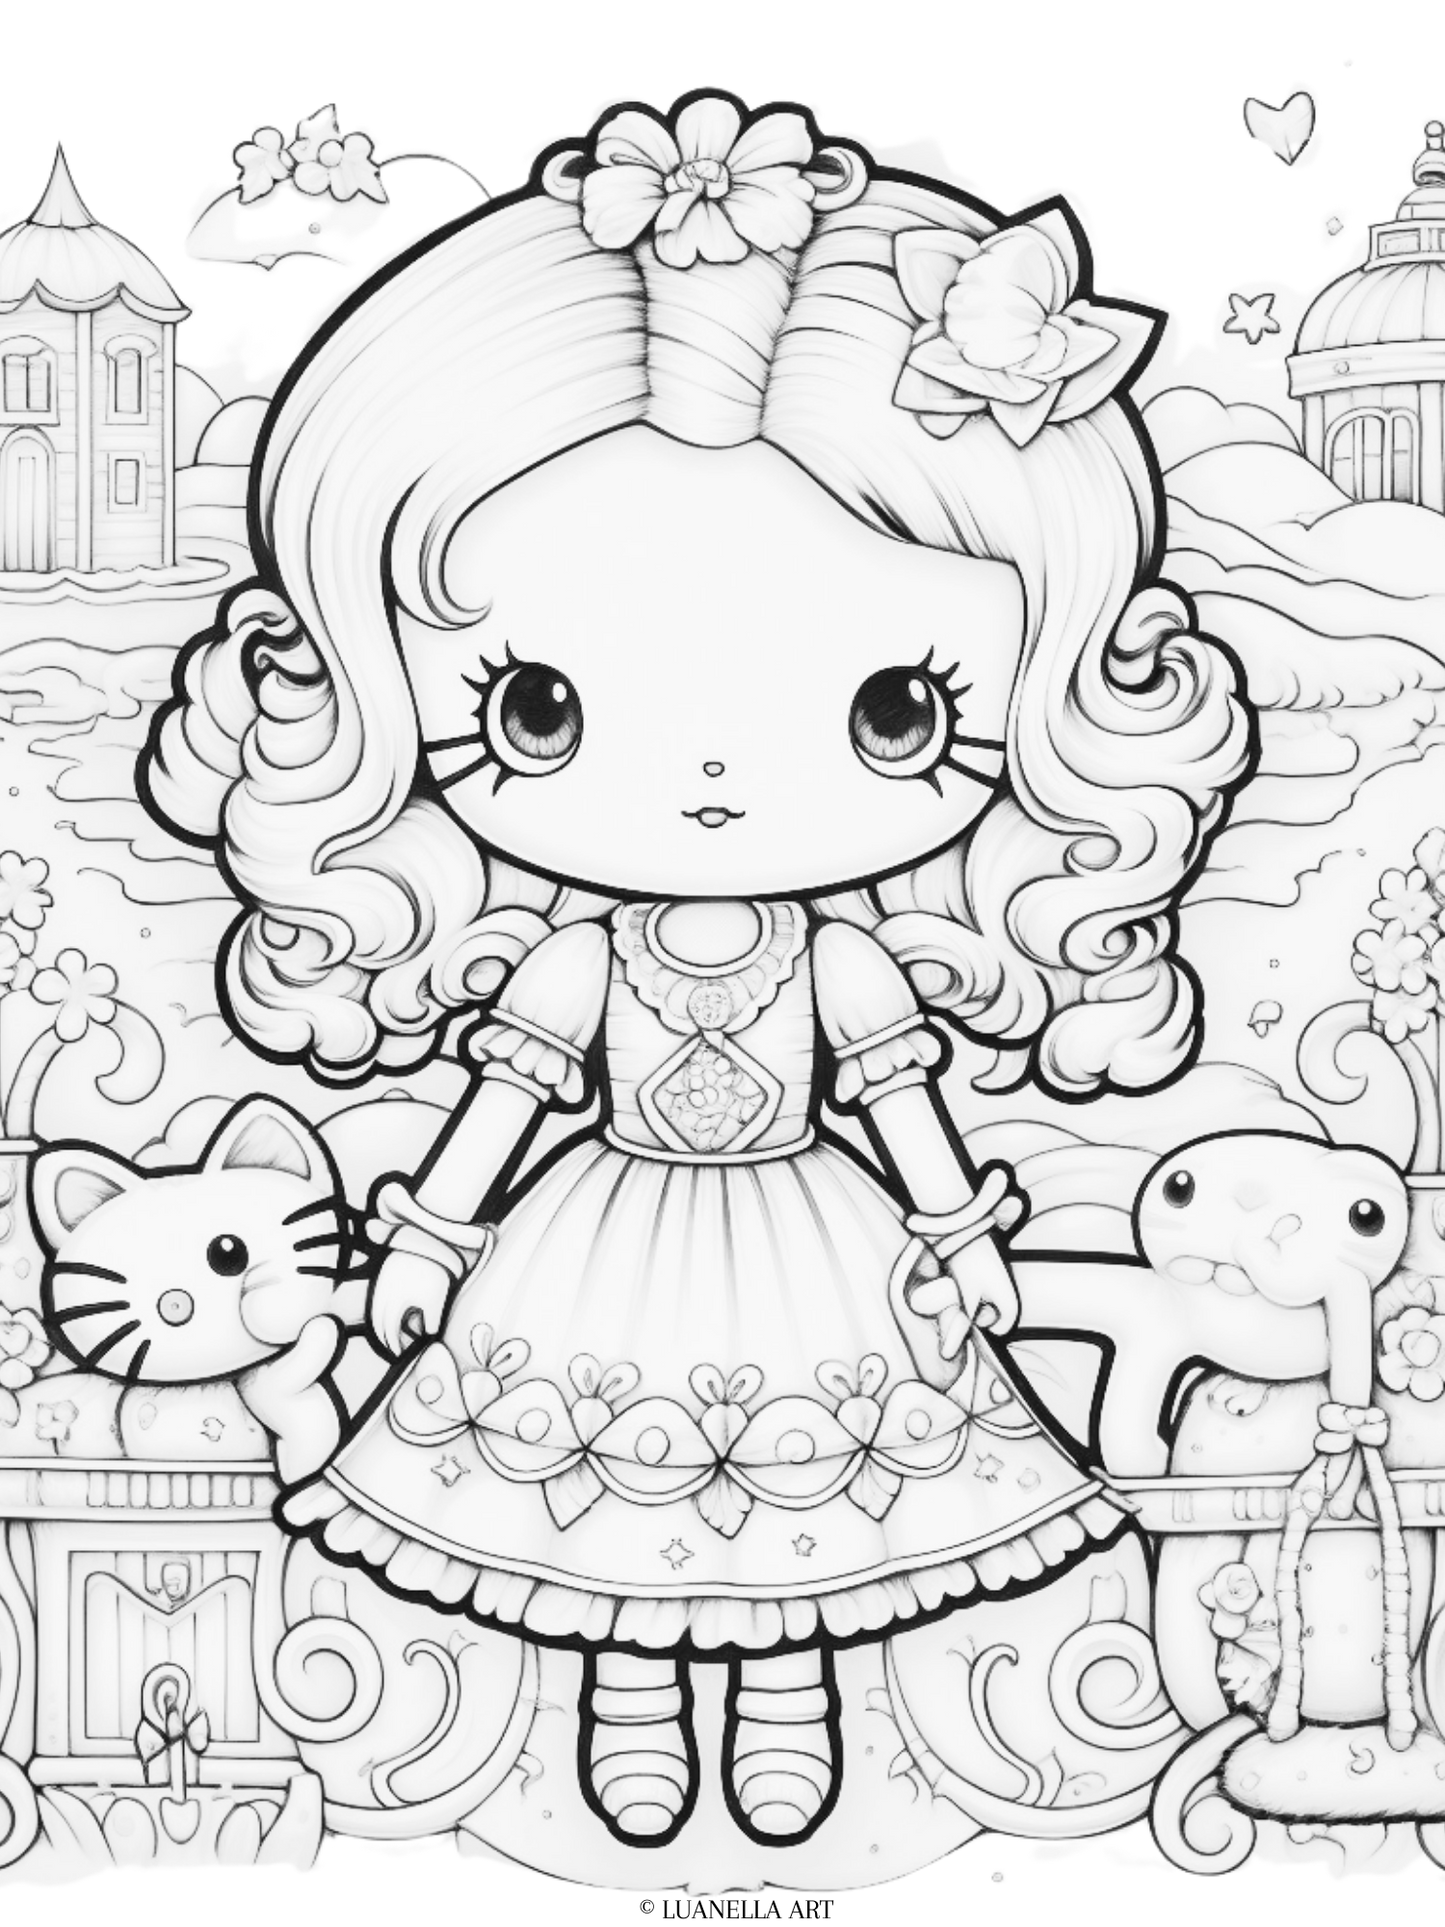 Sanrio characters | Coloring Page | Instant Digital Download